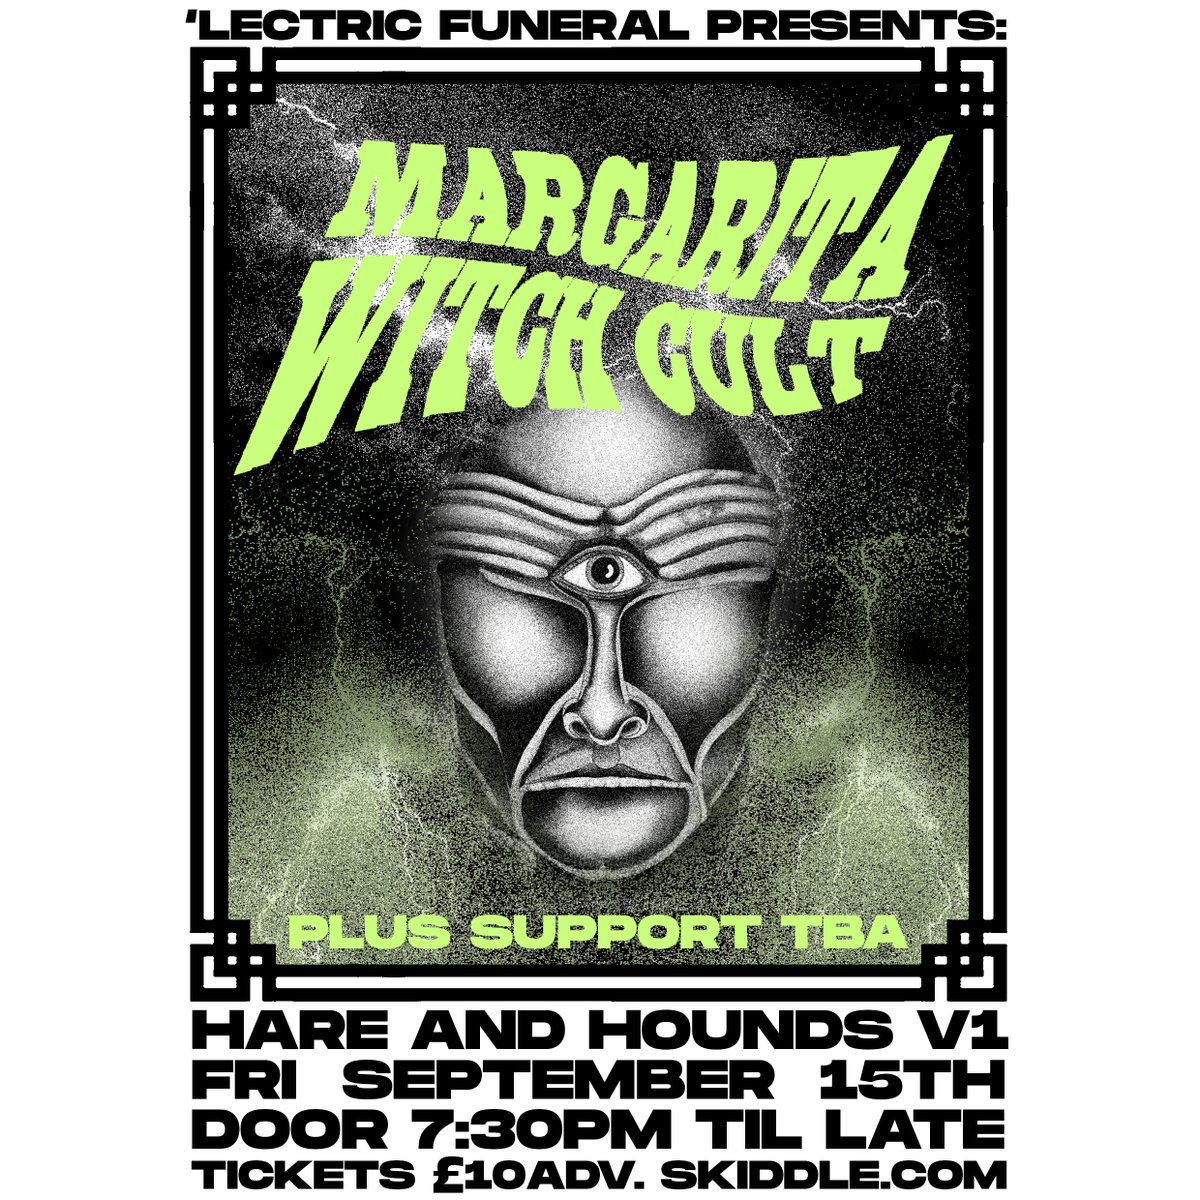 NEW SHOW: Margarita Witch Cult Hare & Hounds Fri Sept 15th Tickets on sale now! 💀🤘 skiddle.com/e/36388011